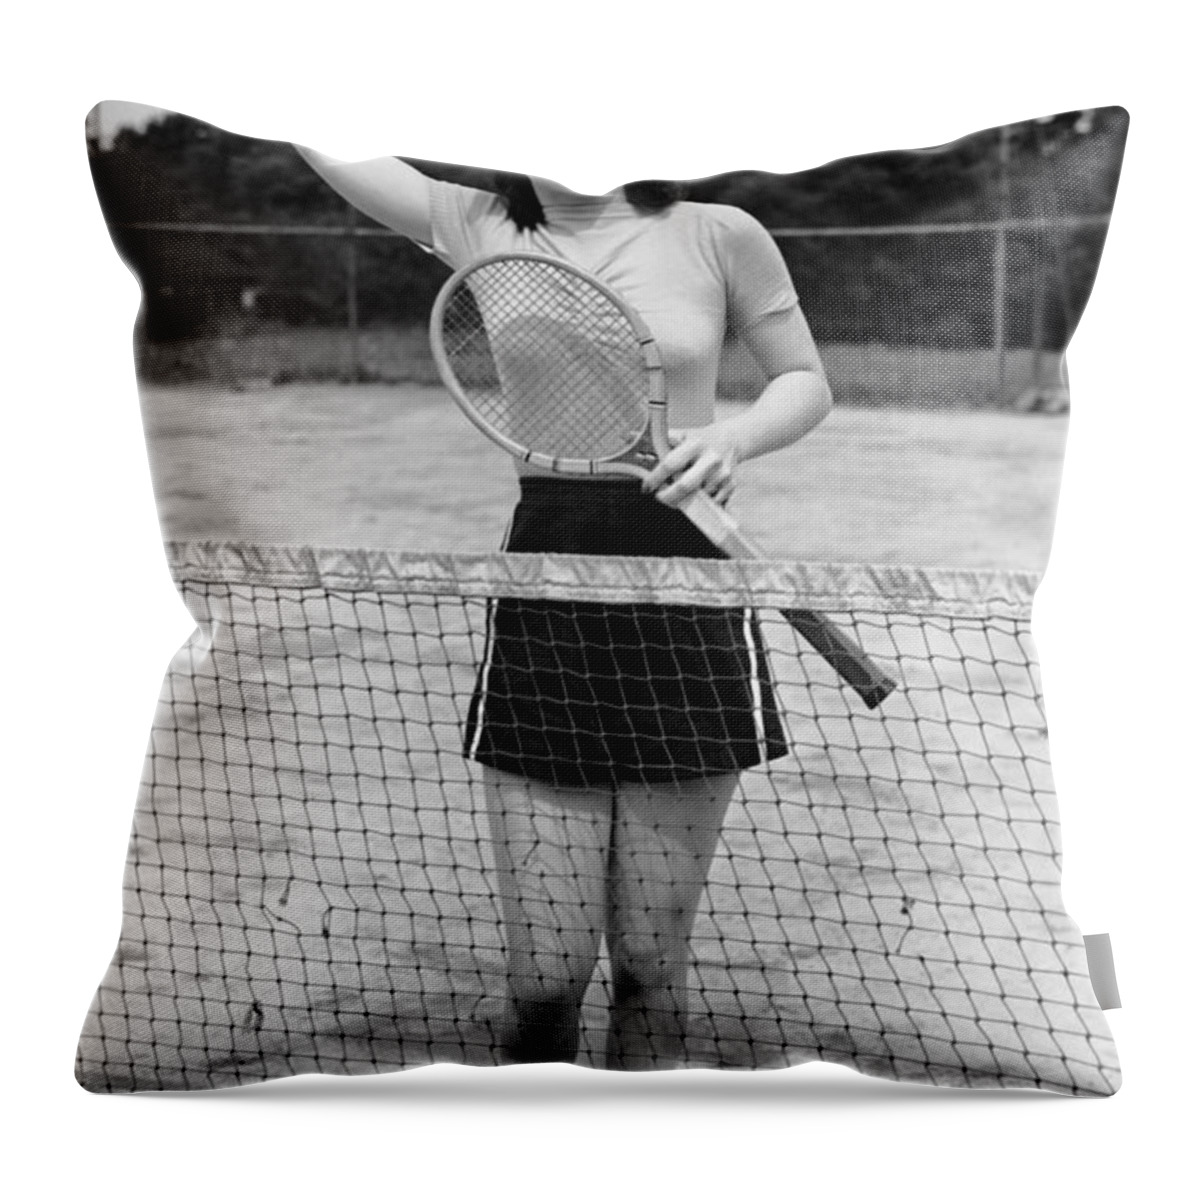 Tennis Throw Pillow featuring the photograph Woman At Tennis Court by George Marks